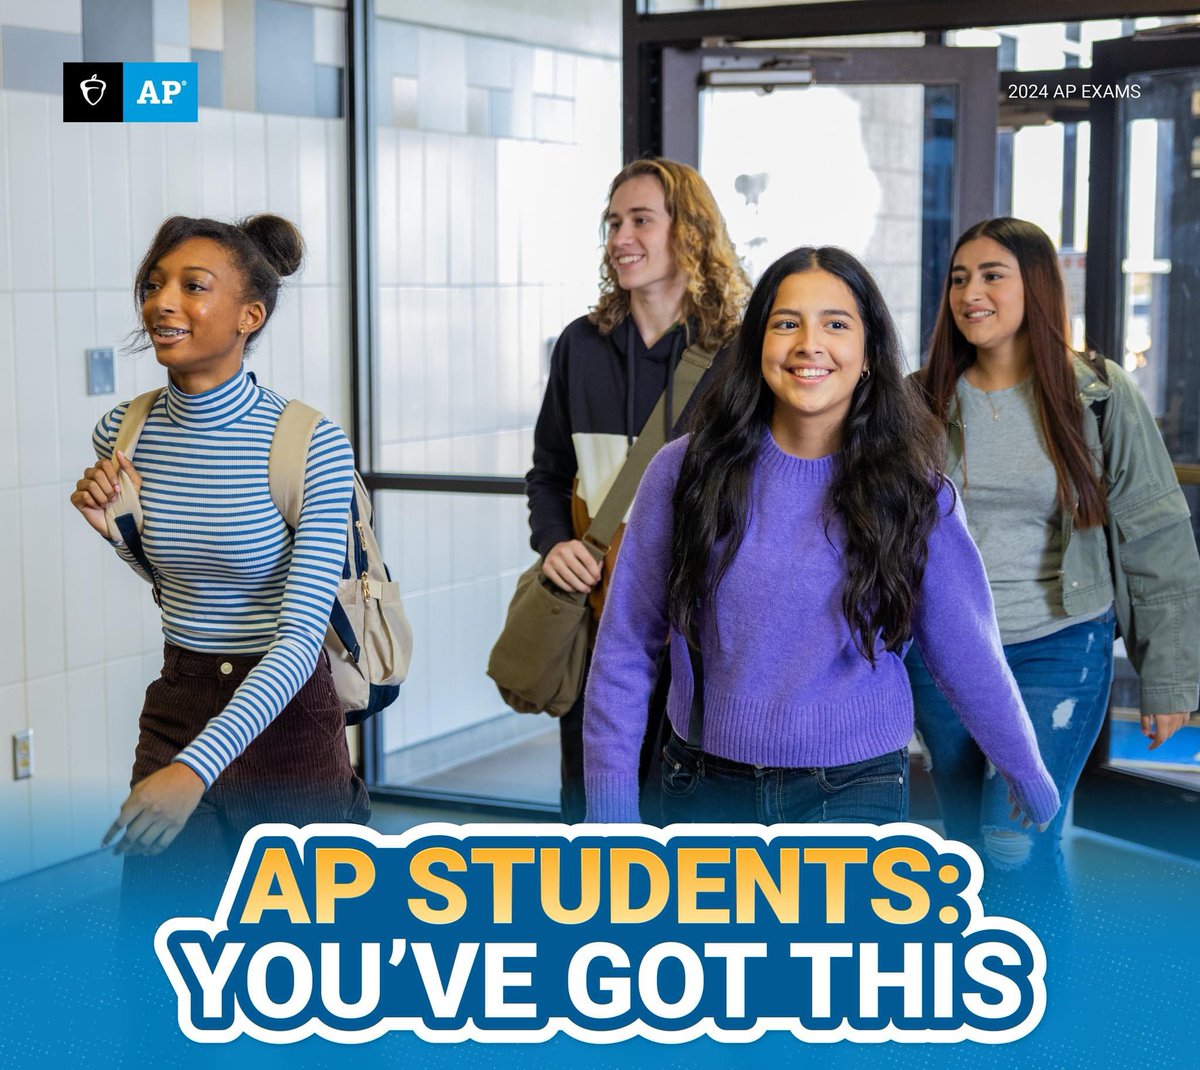 Best of luck to our AP superstars! May the odds be forever in your favor! 😅 And a big shoutout to the amazing coordinators, supporters and volunteers who made it all happen! #MVPs! 💪🏼📚 #APExams #GoodLuck